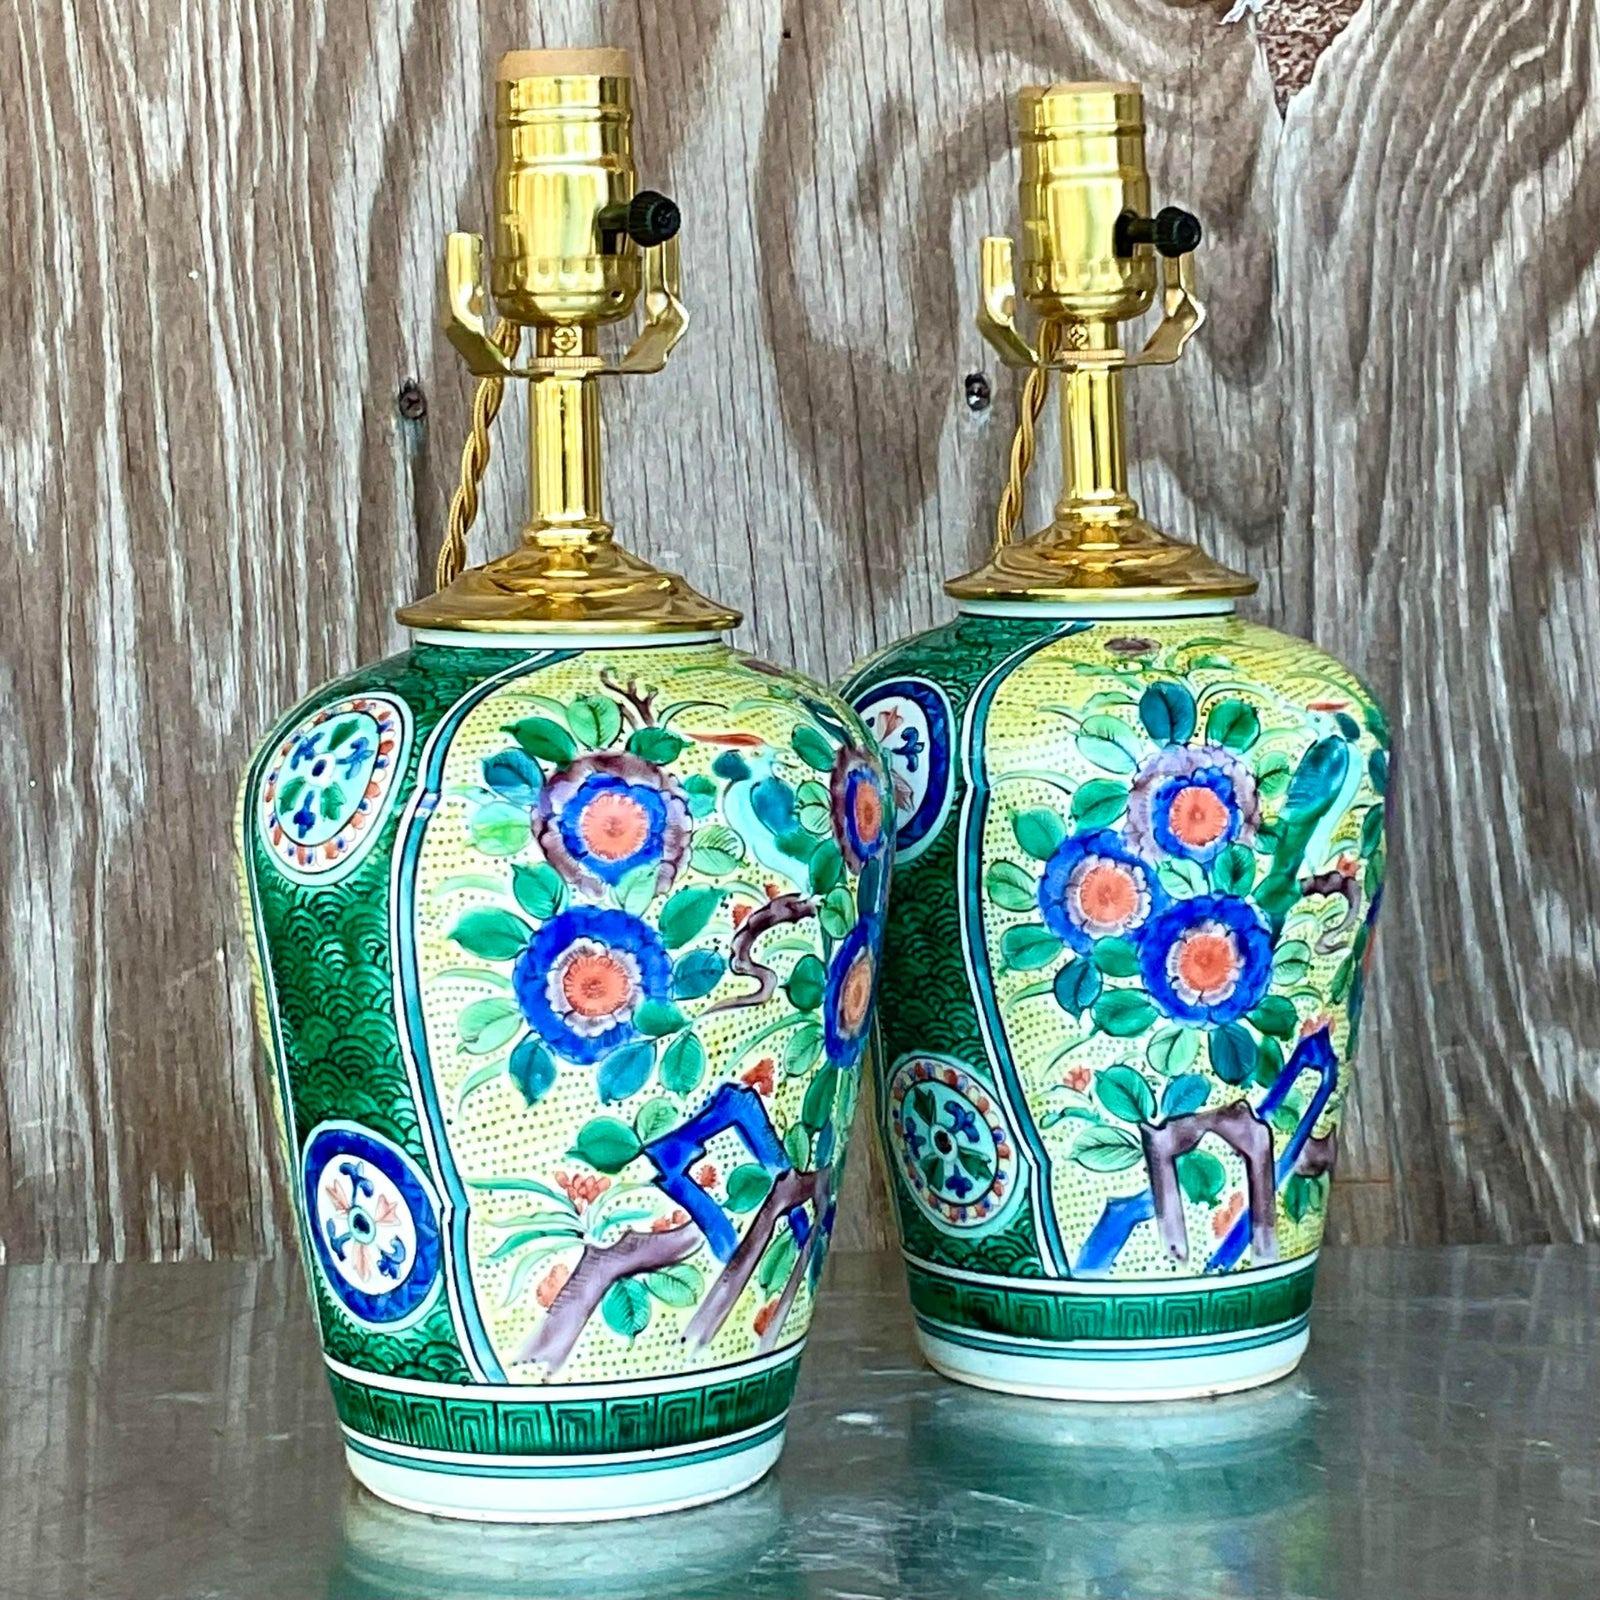 A fabulous pair of vintage Asian lamps. A chic floral motif in a glazed ceramic ginger jar shape. Fully restored with all new wiring and hardware. Acquired from a Palm Beach estate.